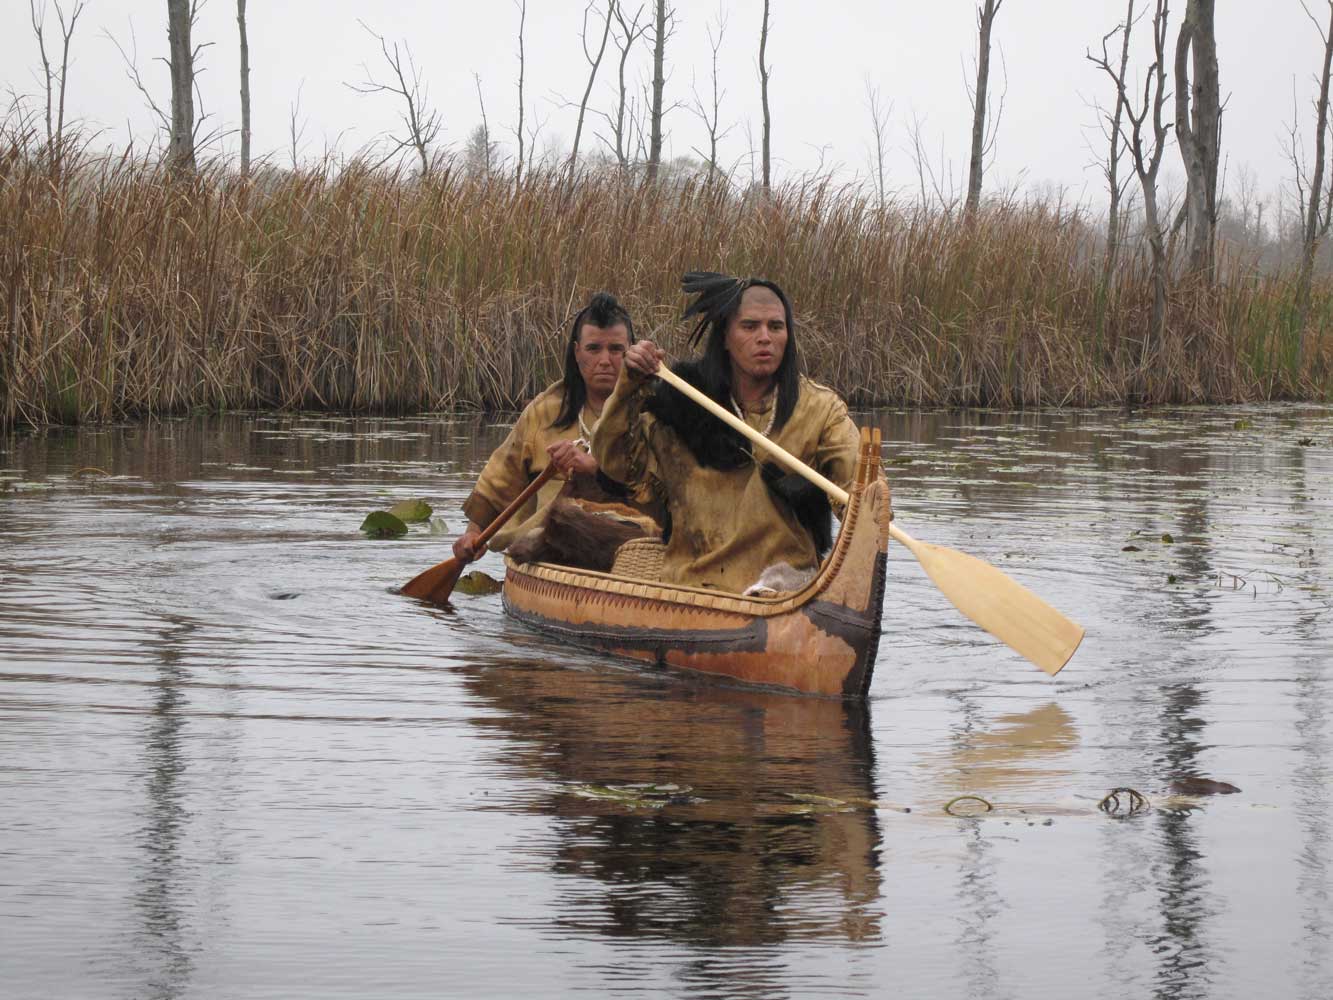 In this scene, we're showing the "axe" traversing great distances. The birchbark canoe is authentic.